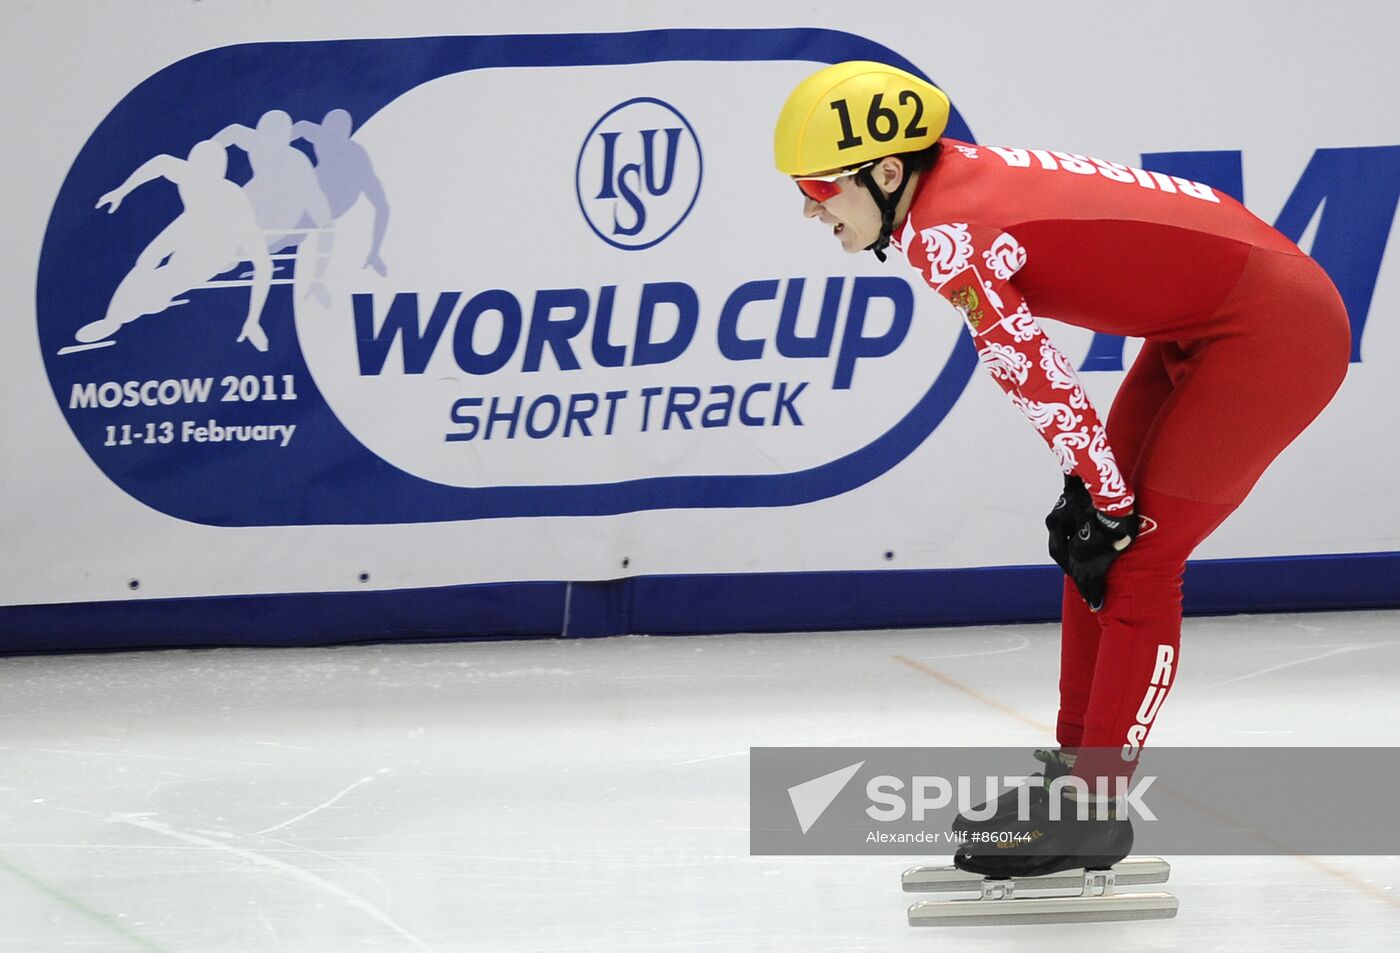 Short track. The 5th stage of the World Cup